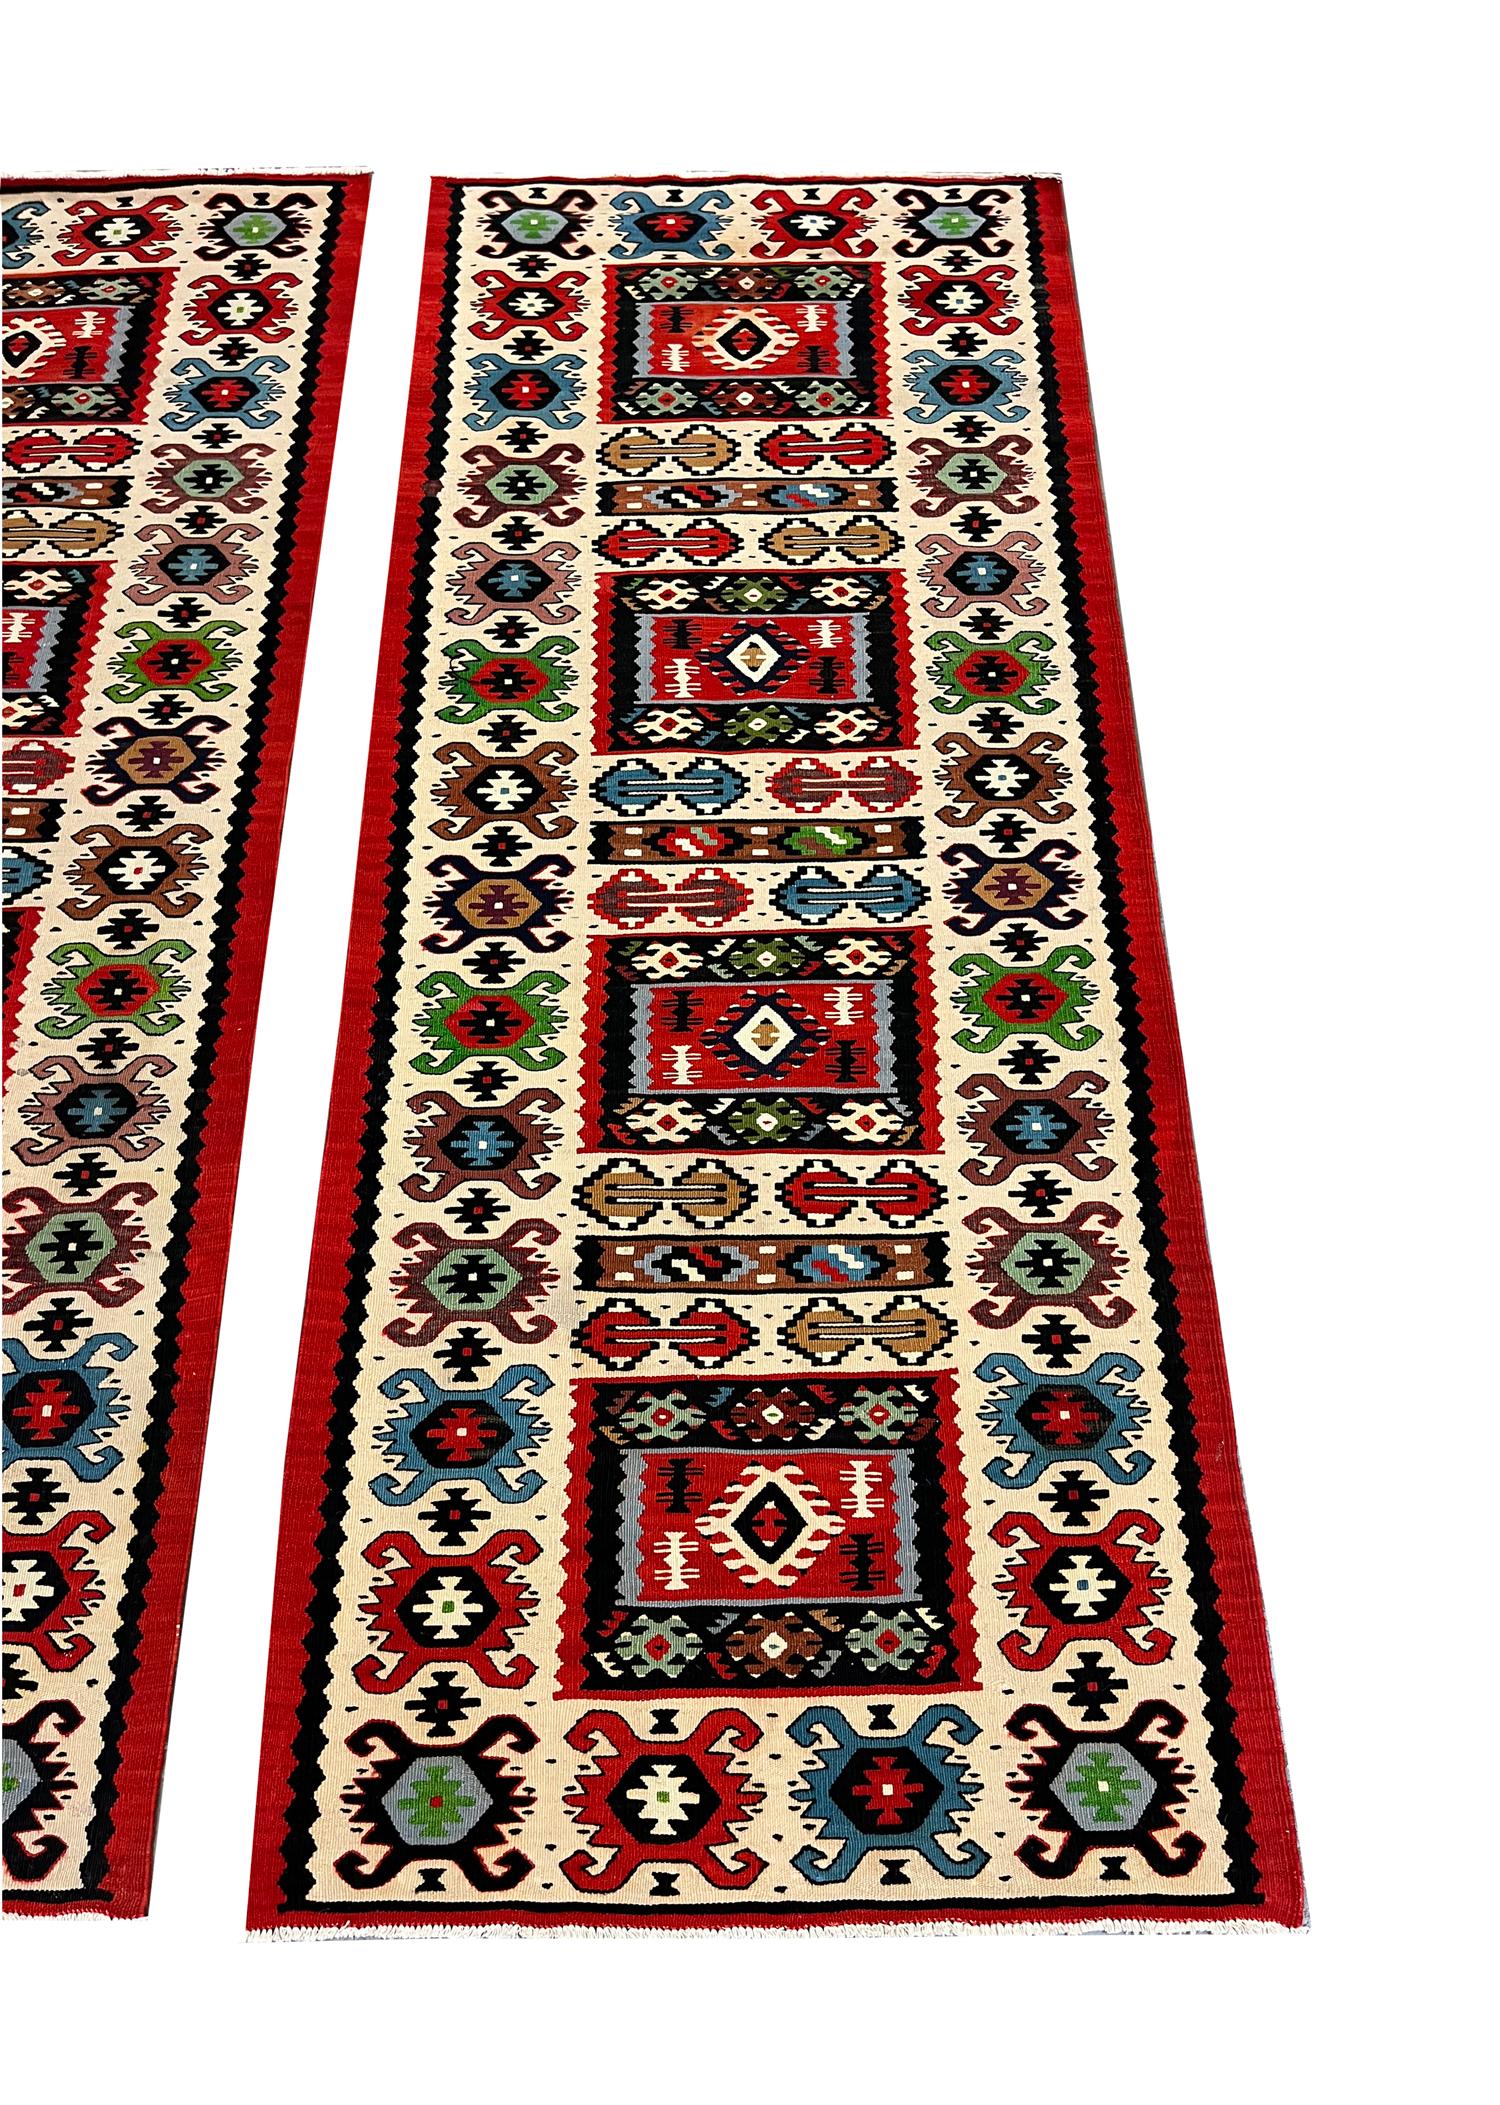 These Kilim runner rugs are fantastic examples of rugs woven in Turkey in the 1970s. The design features a layered repeating pattern woven on a cream background with accents of red, green, blue, beige and brown. The colour palette and the design